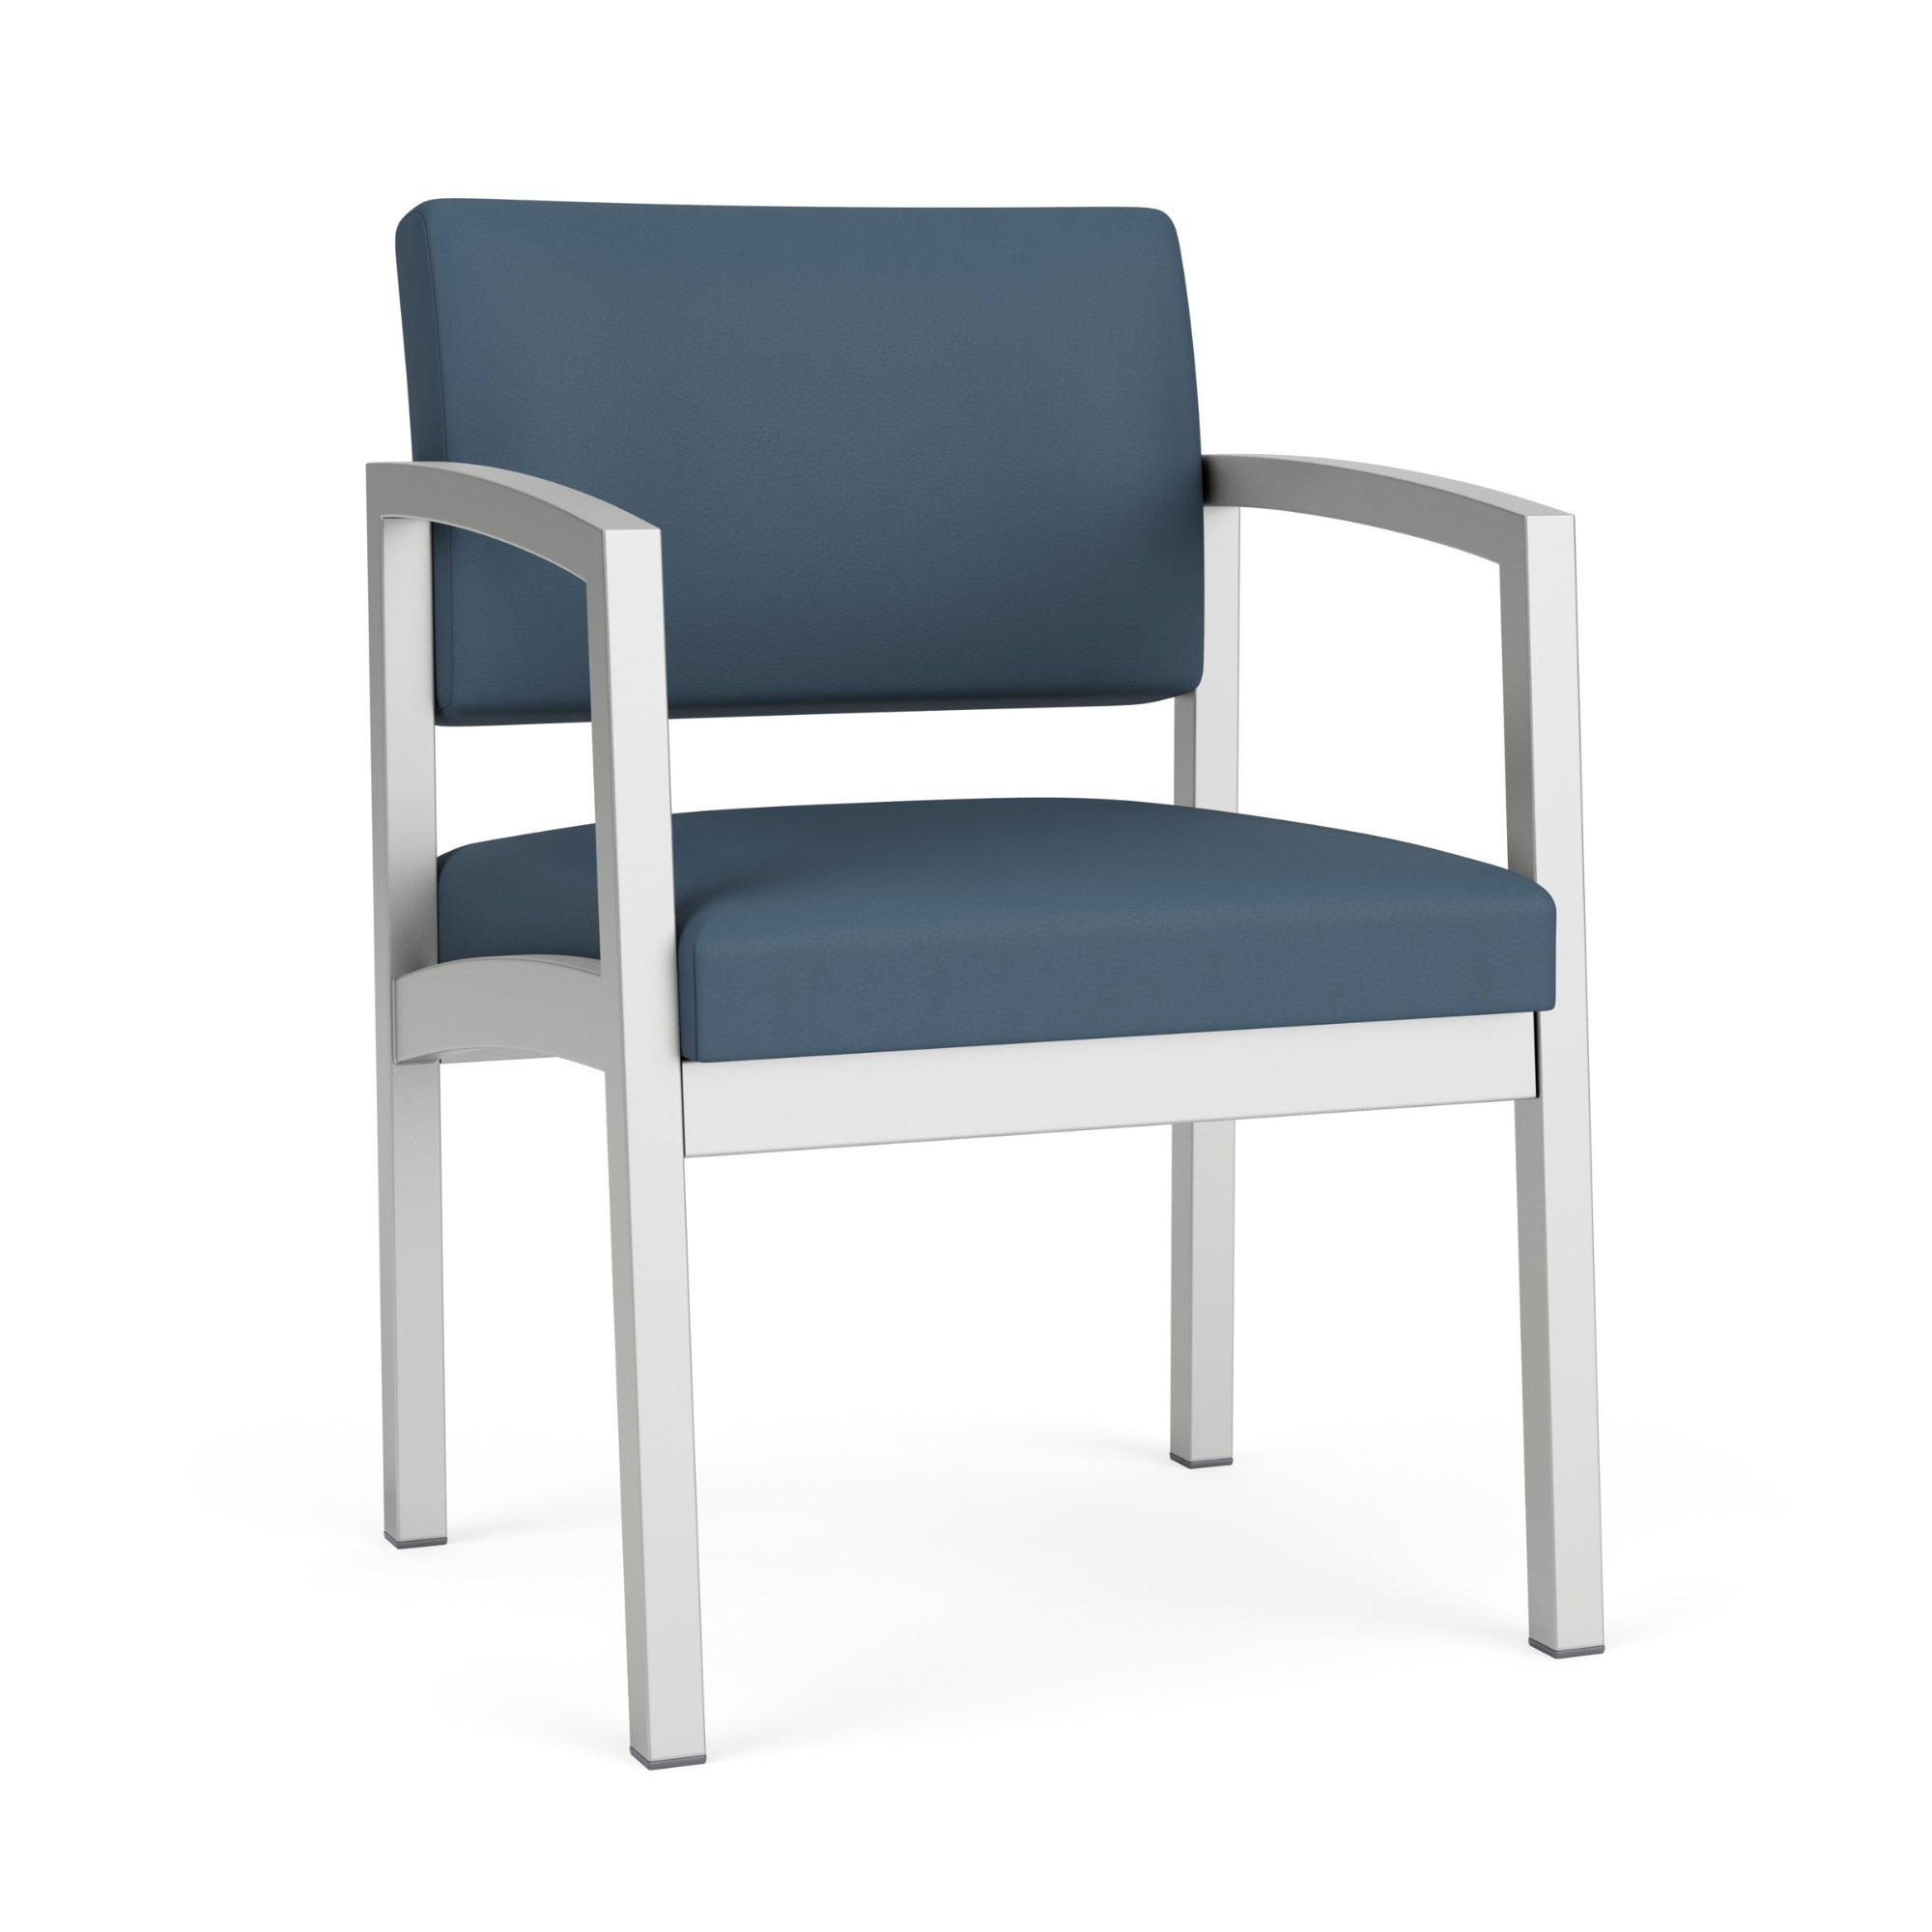 Lenox Steel Collection Reception Seating, Guest Chair, 300 lb. Capacity, Healthcare Vinyl Upholstery, FREE SHIPPING